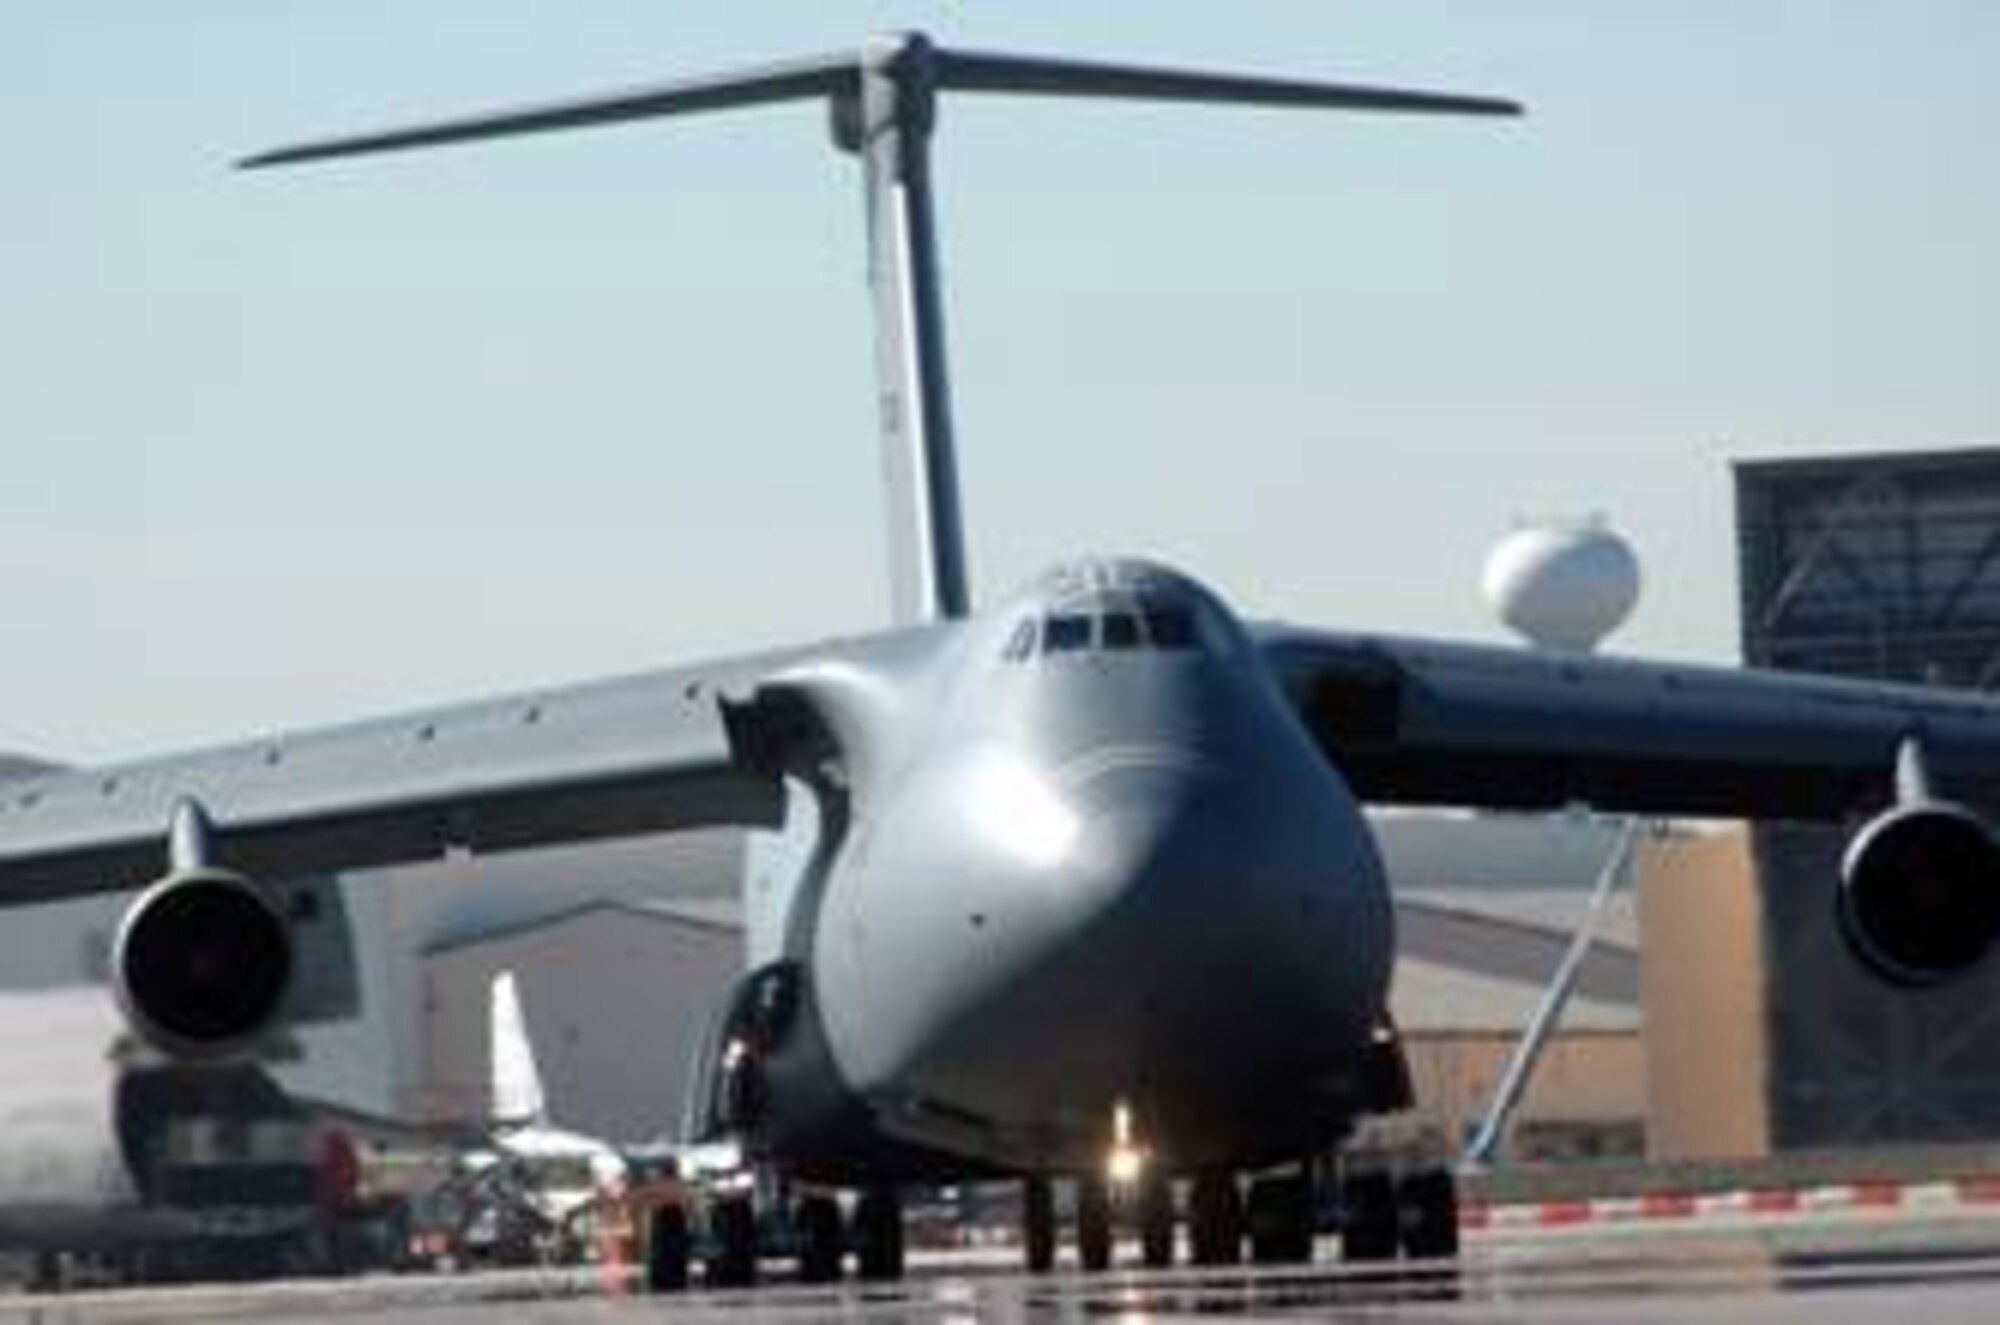 ROBINS AIR FORCE BASE, Ga. (AFMCNS)- A C-5B Galaxy, aircraft 87040, taxis onto Robins' runway on its way to Travis Air Force Base, Calif., after completing a record-low 159 days in programmed depot maintenance. (Air Force photo by Sue Sapp)

